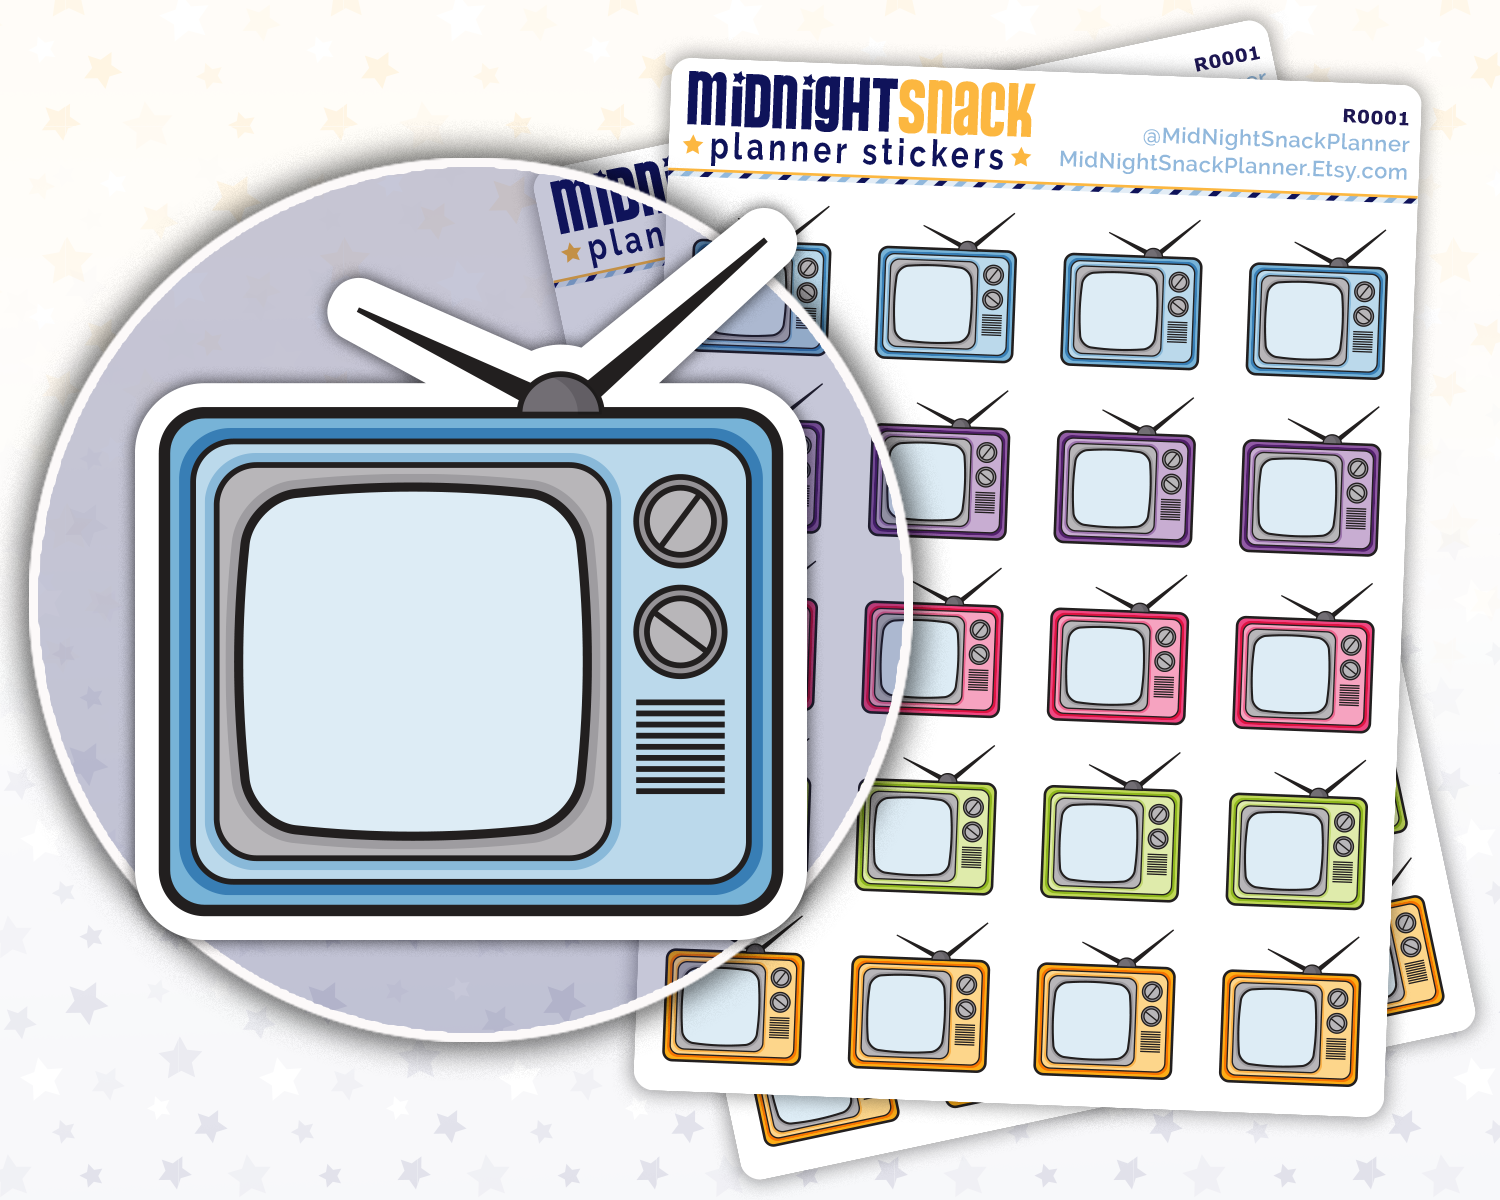 Television Planner Stickers from Midnight Snack Planner